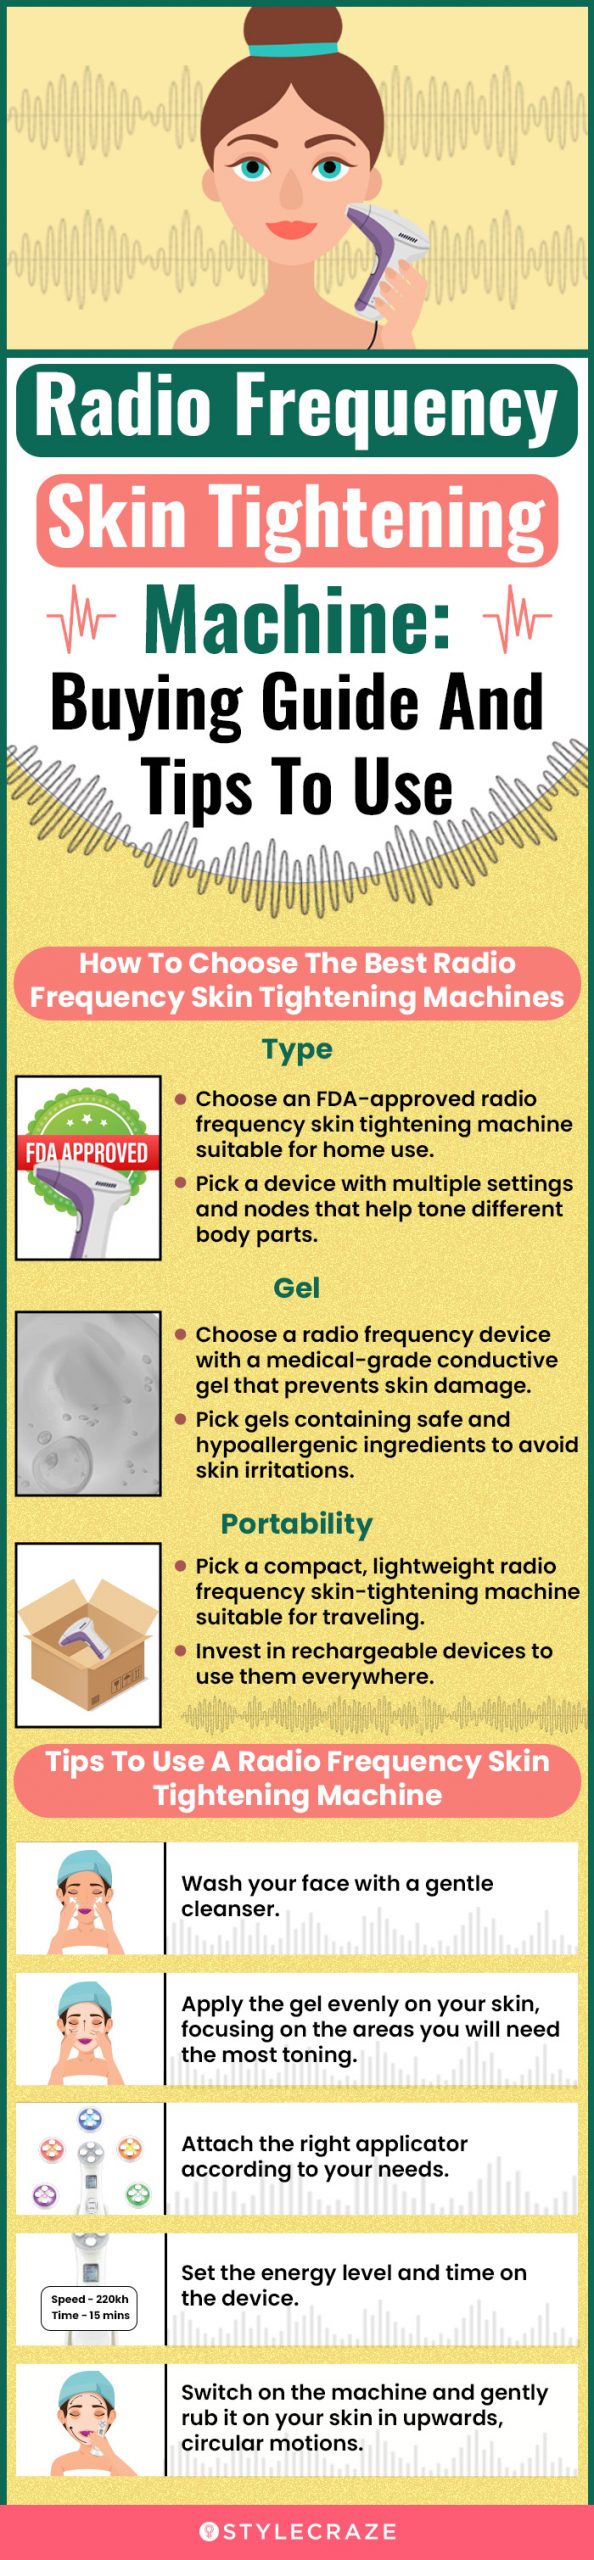 Radio Frequency Skin Tightening Machine: Buying Guide And Tips To Use [infographic]